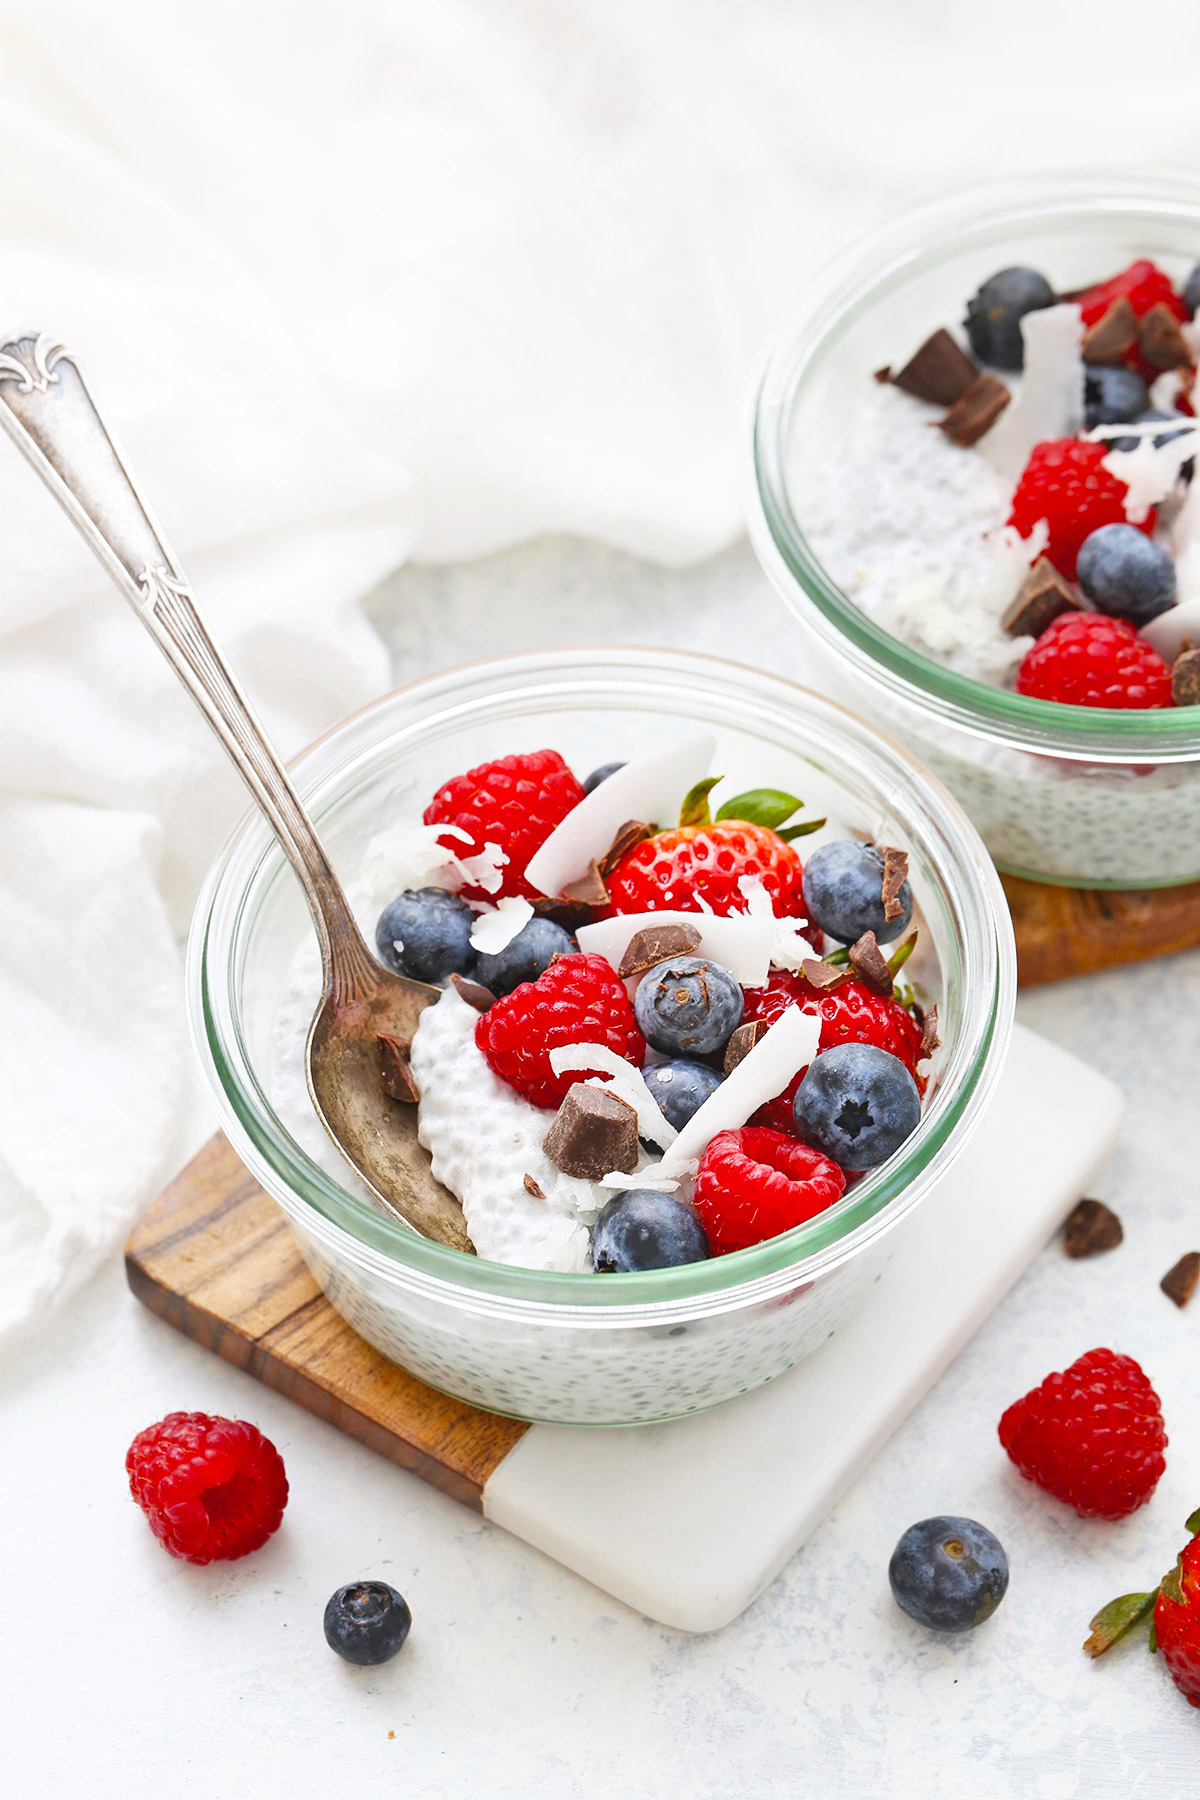 Coconut Chia Pudding from One Lovely Life